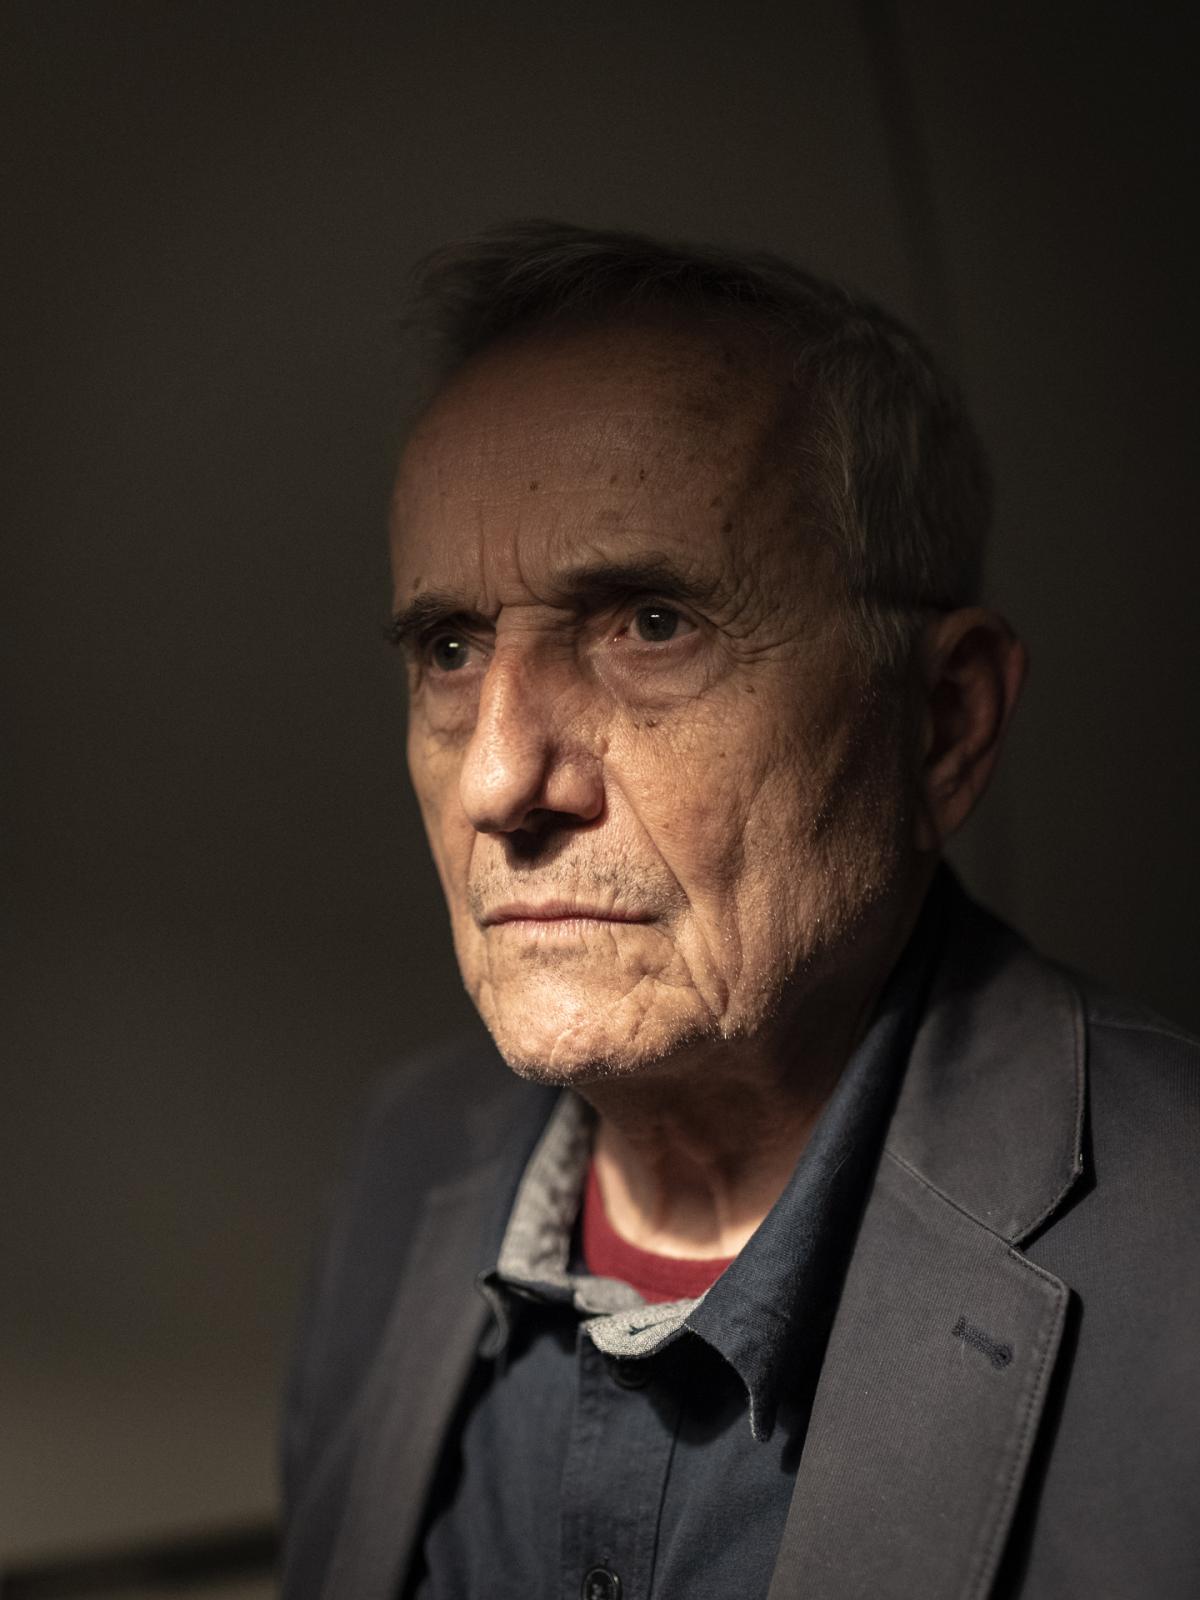 PORTRAITS - The film director Marco Bellocchio photographed by Matteo...